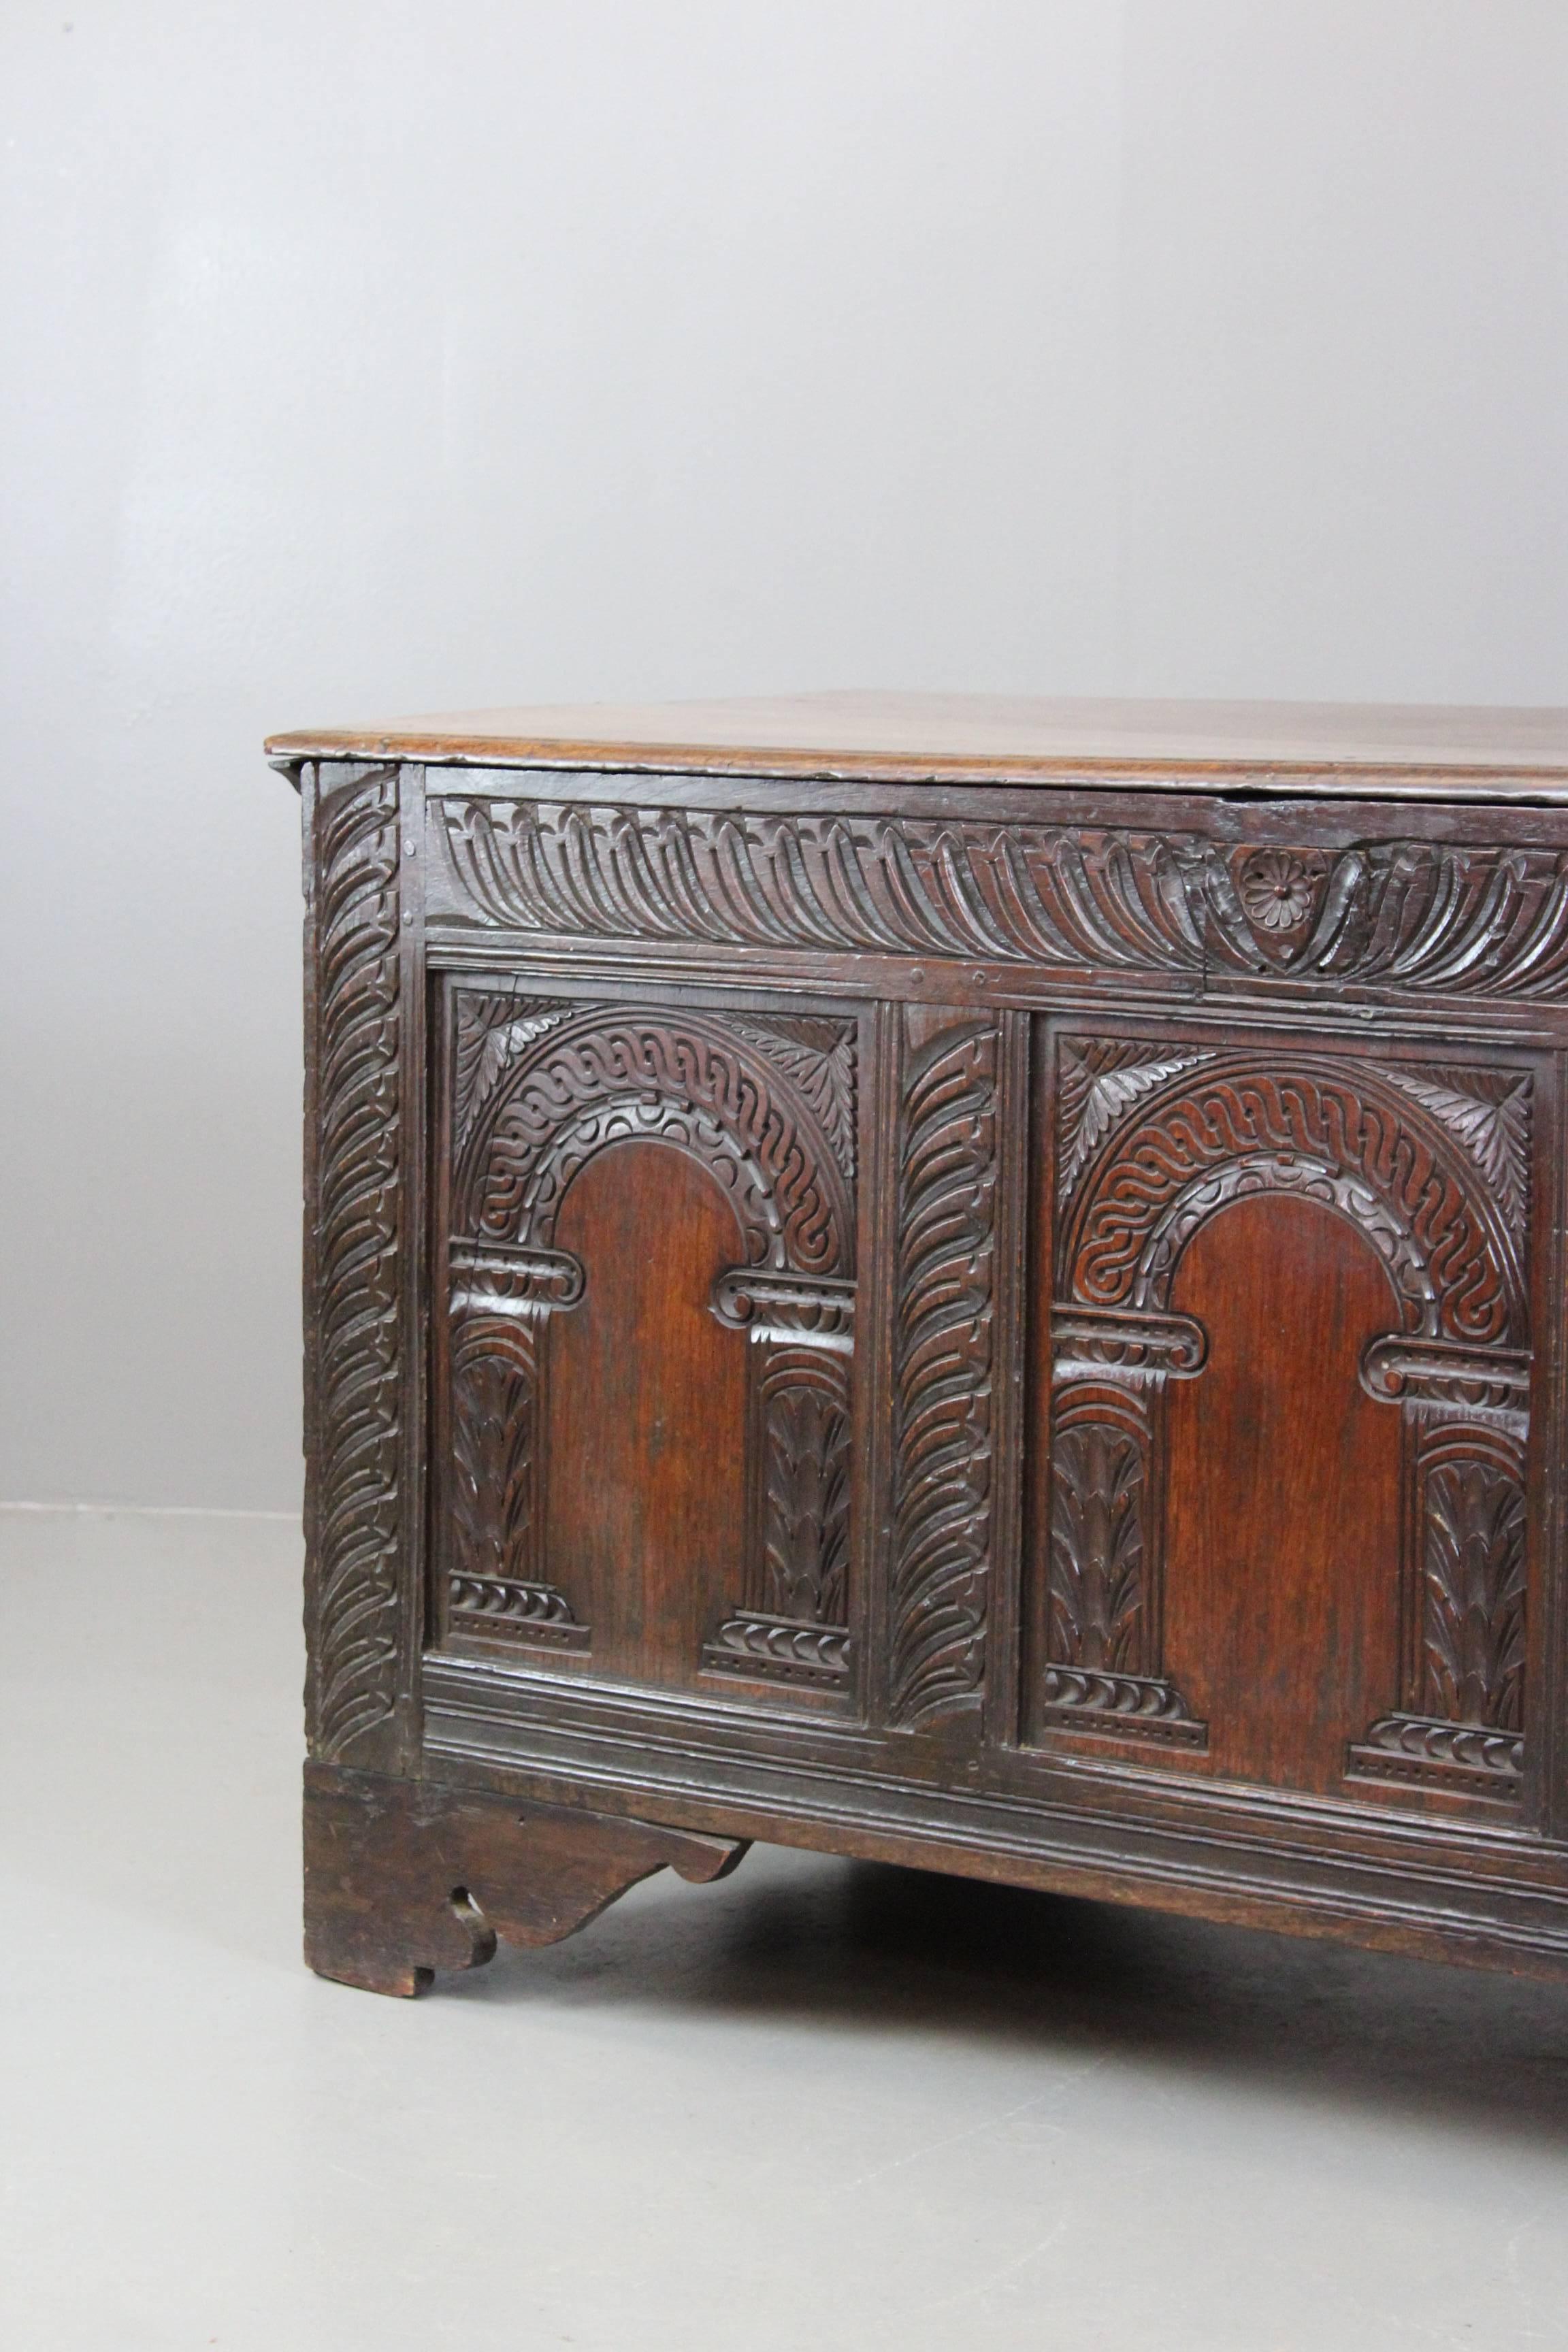 Antique oak coffer. 18th century carved oak coffer with hinged lid, plant hinged lid with three arcaded panels to the front and bracket feet. Quality craftsmanship and a very useful and practical storage item that could be used throughout the